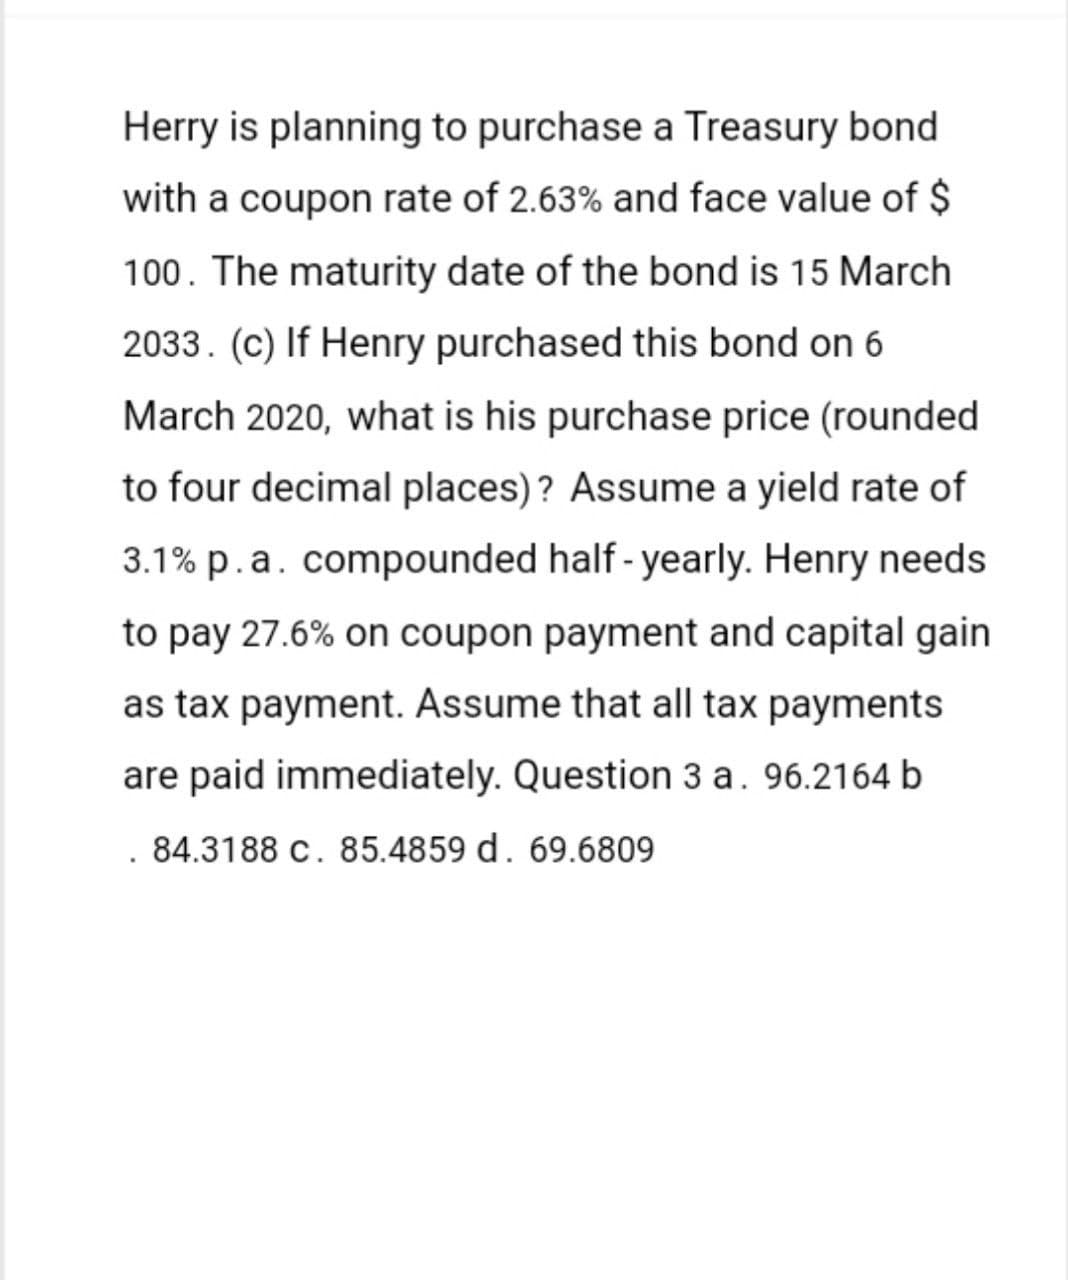 Herry is planning to purchase a Treasury bond
with a coupon rate of 2.63% and face value of $
100. The maturity date of the bond is 15 March
2033. (c) If Henry purchased this bond on 6
March 2020, what is his purchase price (rounded
to four decimal places)? Assume a yield rate of
3.1% p. a. compounded half-yearly. Henry needs.
to pay 27.6% on coupon payment and capital gain
as tax payment. Assume that all tax payments
are paid immediately. Question 3 a. 96.2164 b
84.3188 c. 85.4859 d. 69.6809